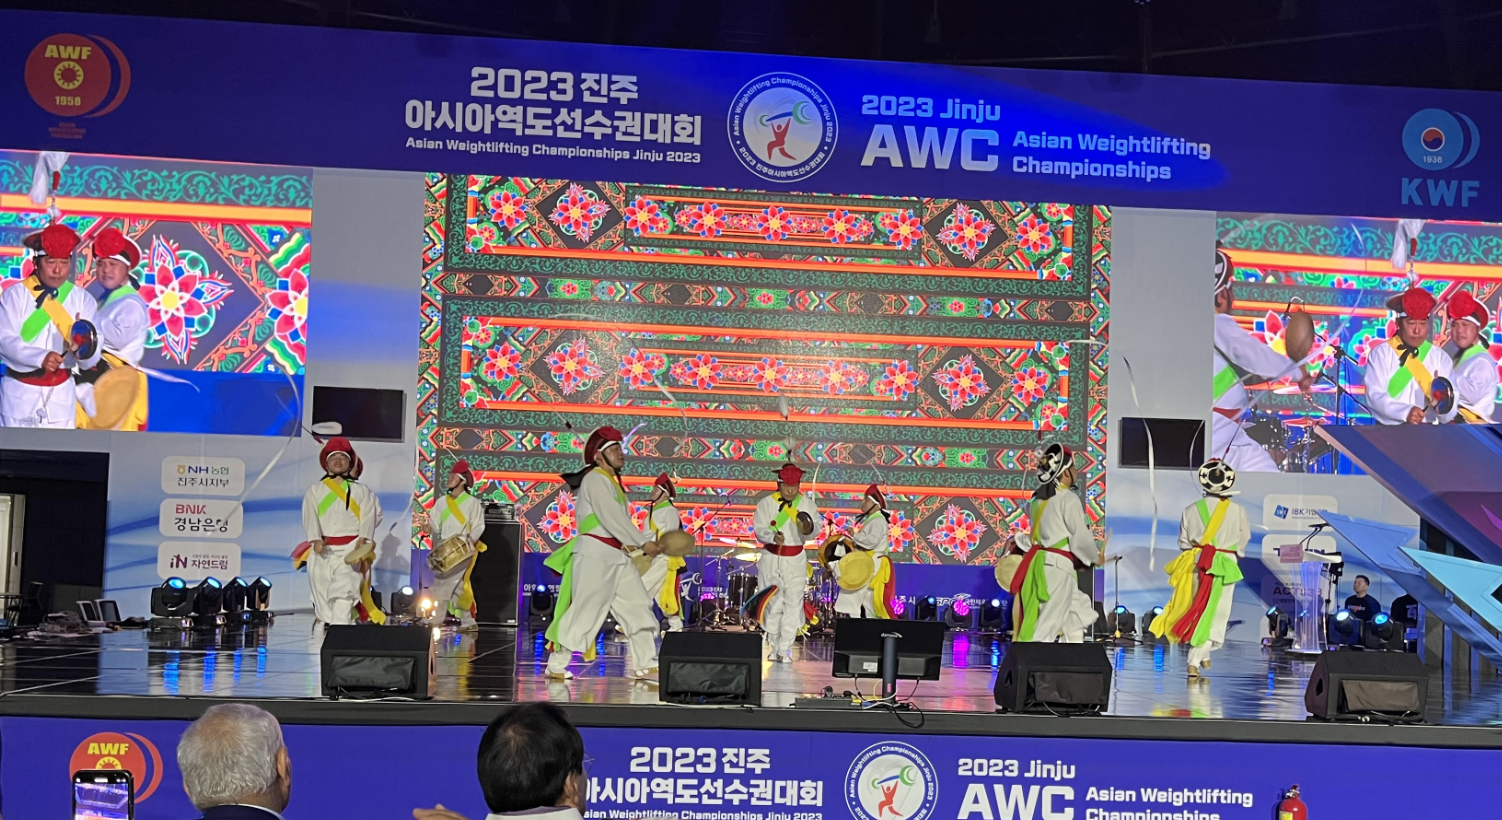 The Opening Ceremony of the Asian Weightlifting Championships in Jinju featured musical performances and entertainment ©Brian Oliver